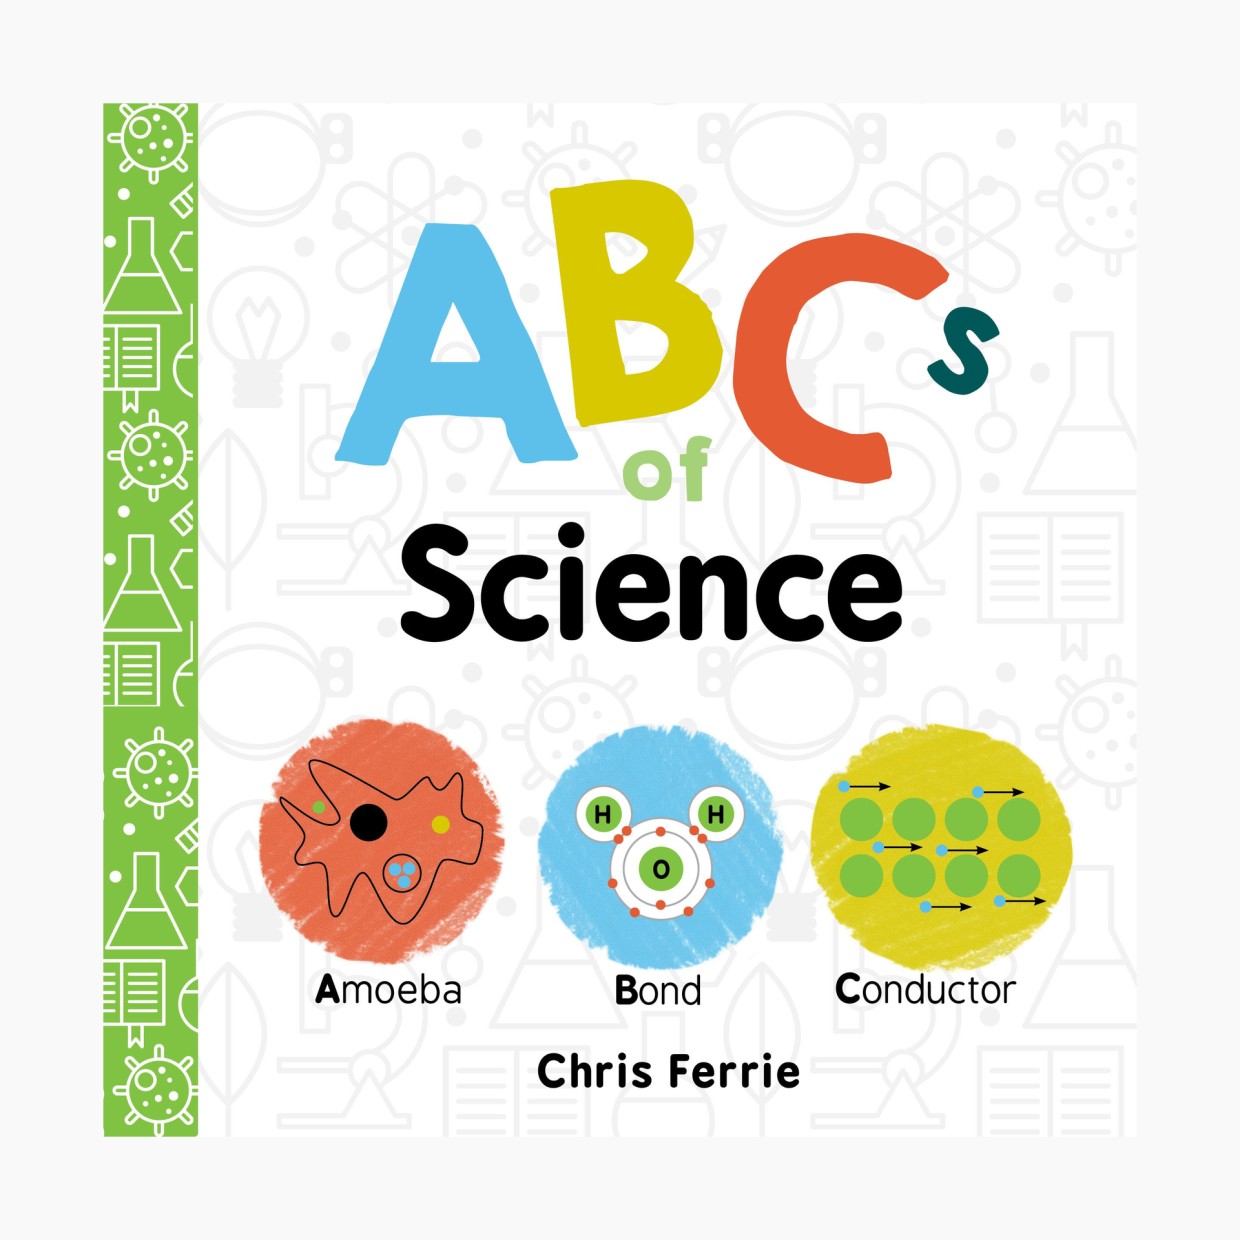 ABCs of Science.